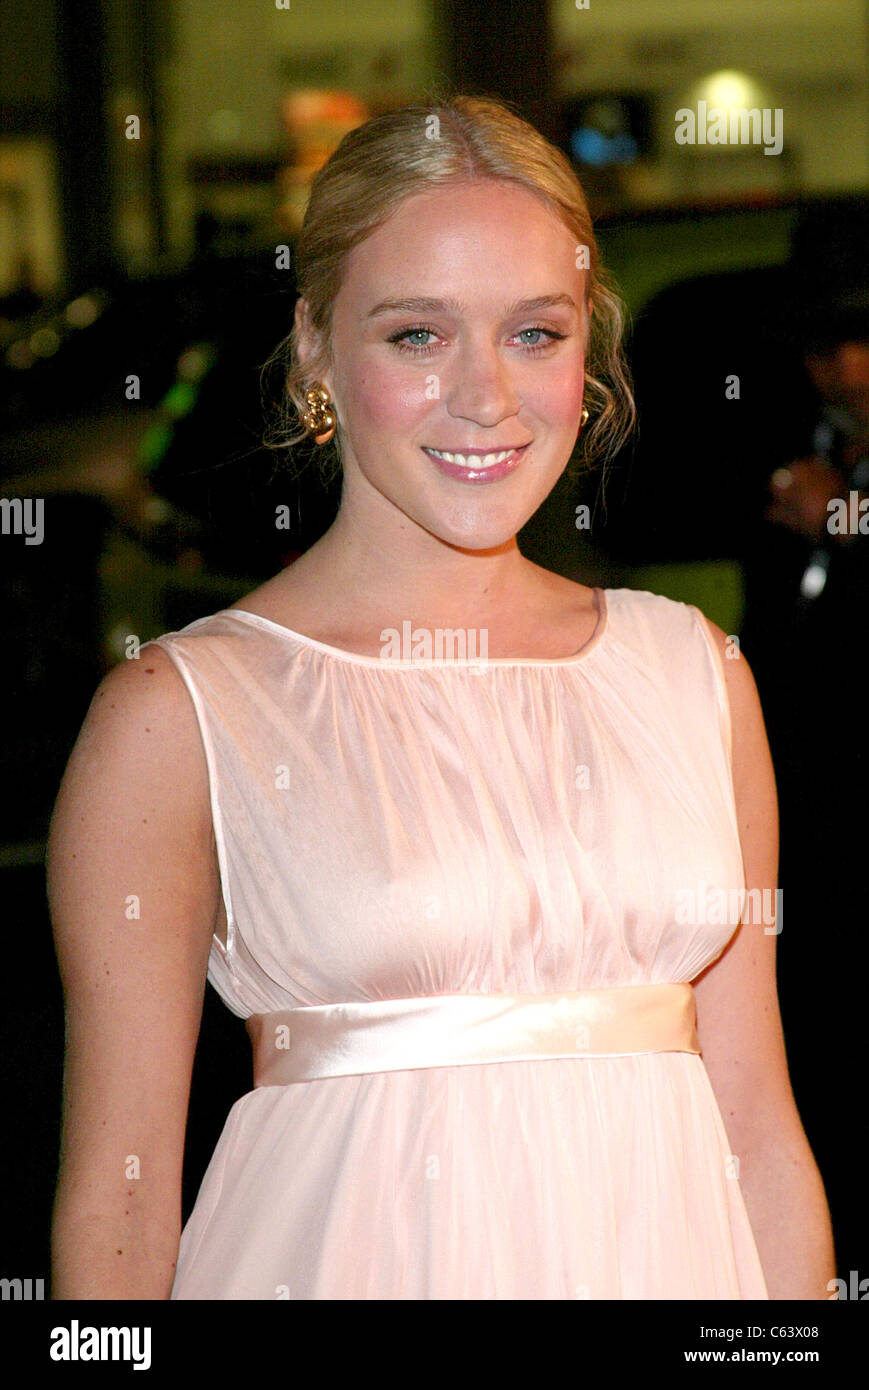 Chloe Sevigny at arrivals for BIG LOVE HBO Season Premiere, Grauman's Chinese Theatre, Los Angeles, CA, February 23, 2006. Photo by: Jeremy Montemagni/Everett Collection Stock Photo